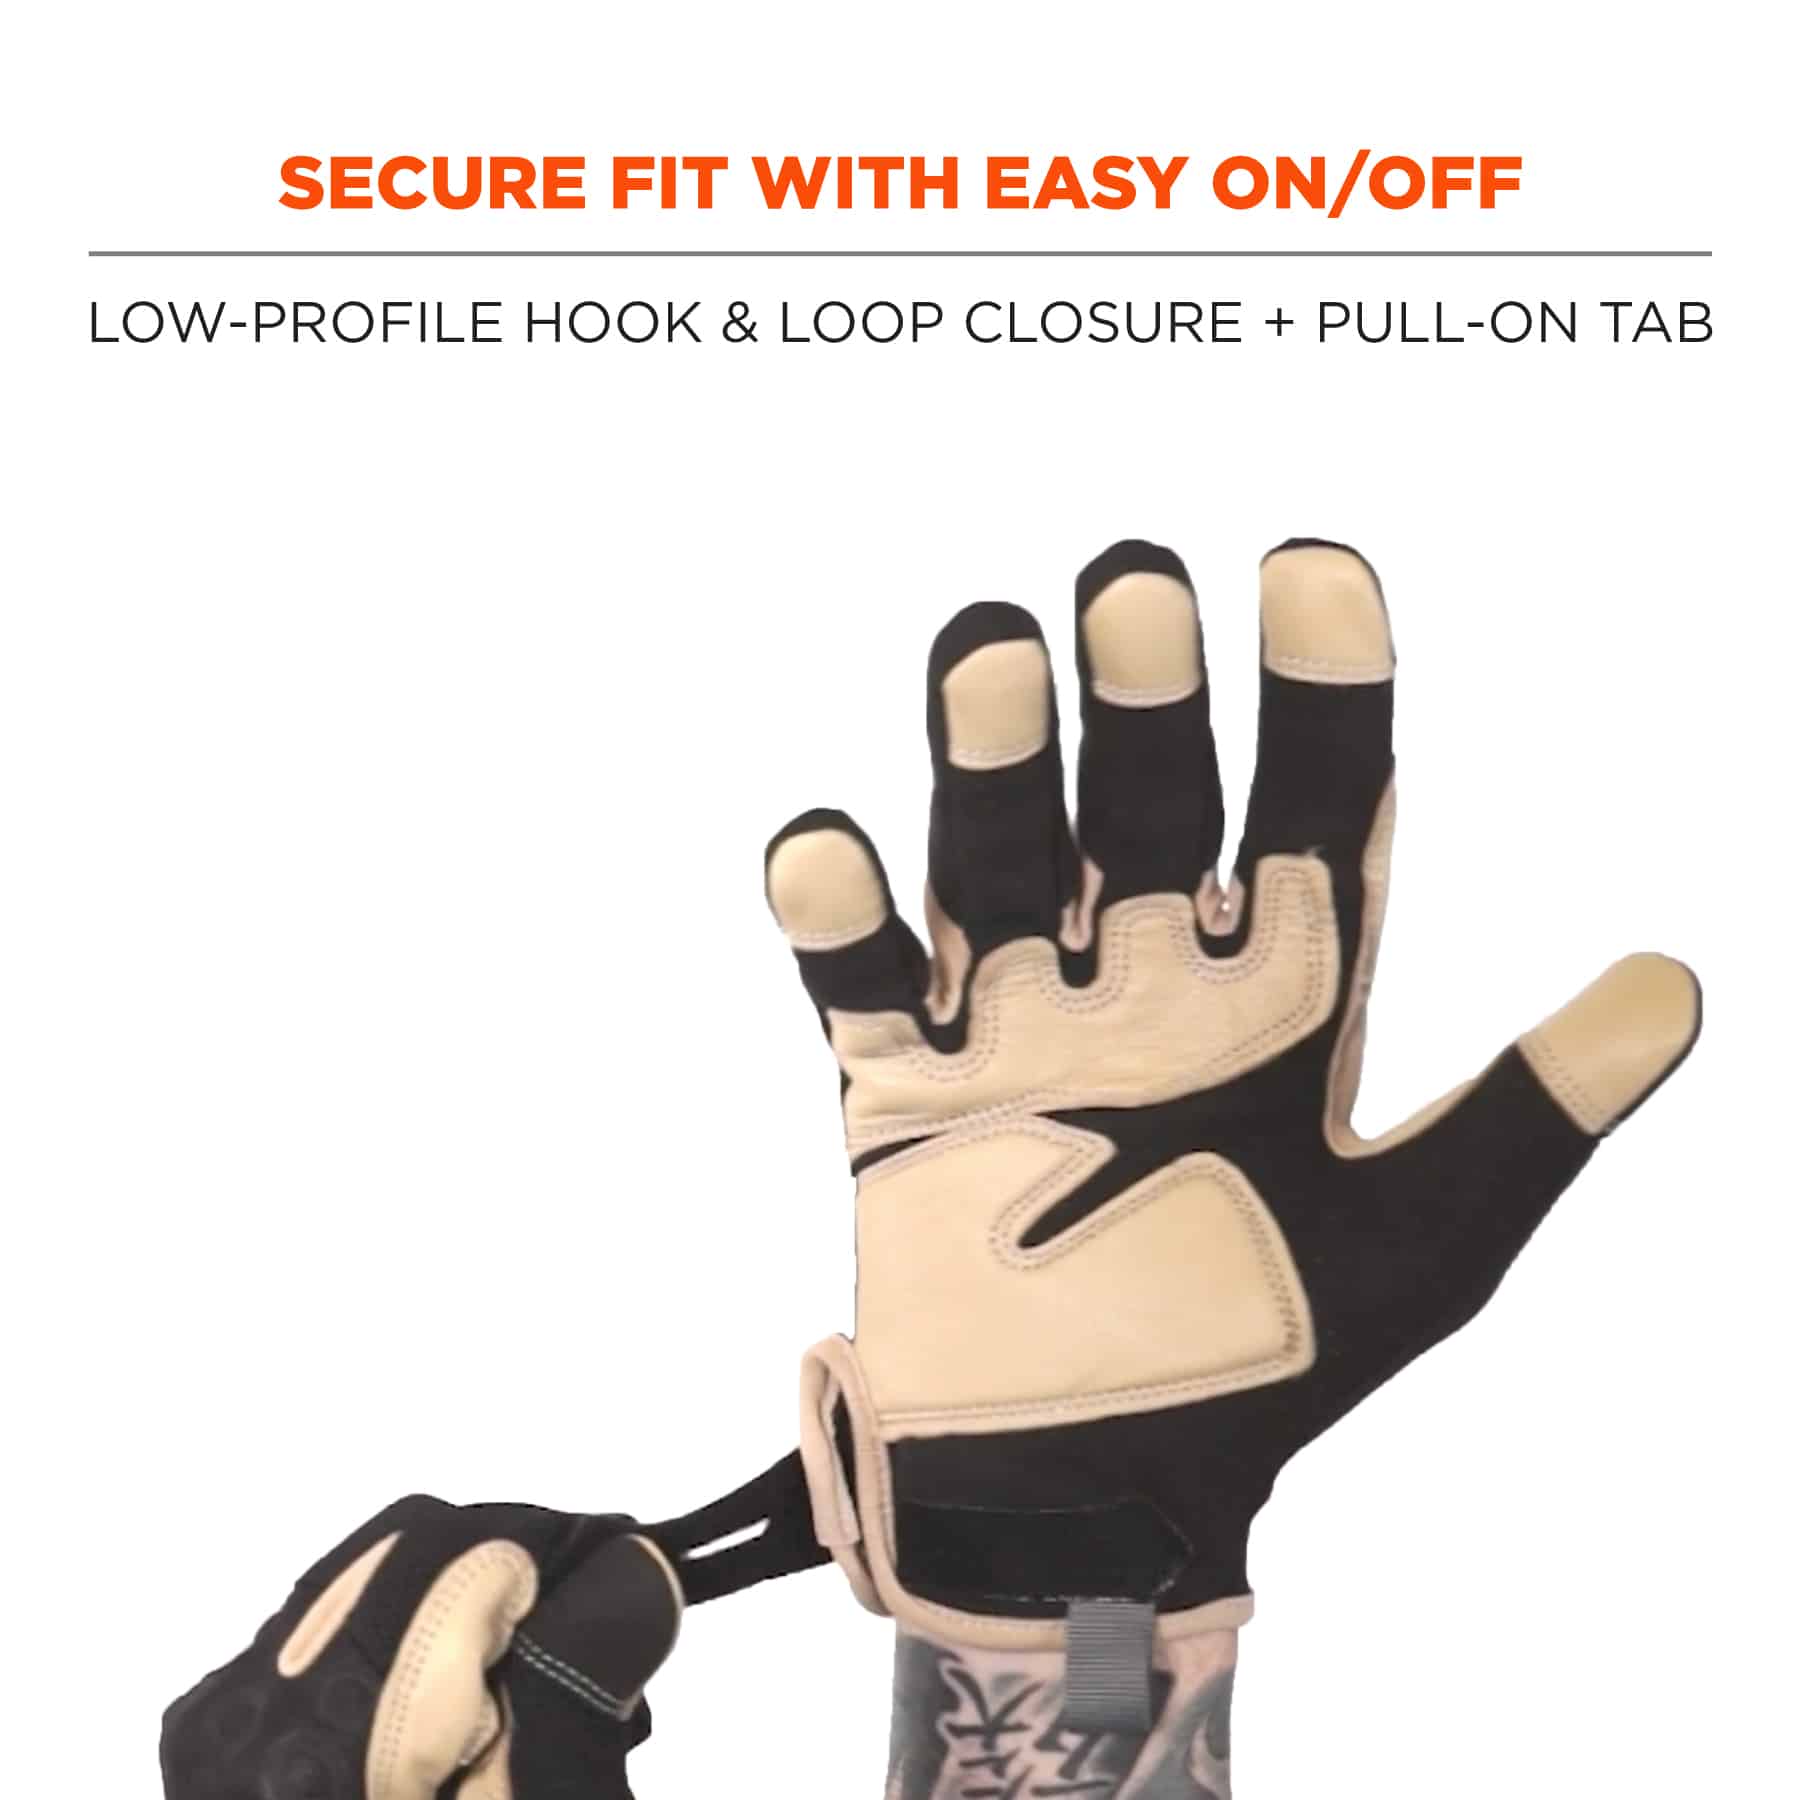 https://www.ergodyne.com/sites/default/files/product-images/17142-710ltr-heavy-duty-work-gloves-secure-fit-with-easy-on-off.jpg